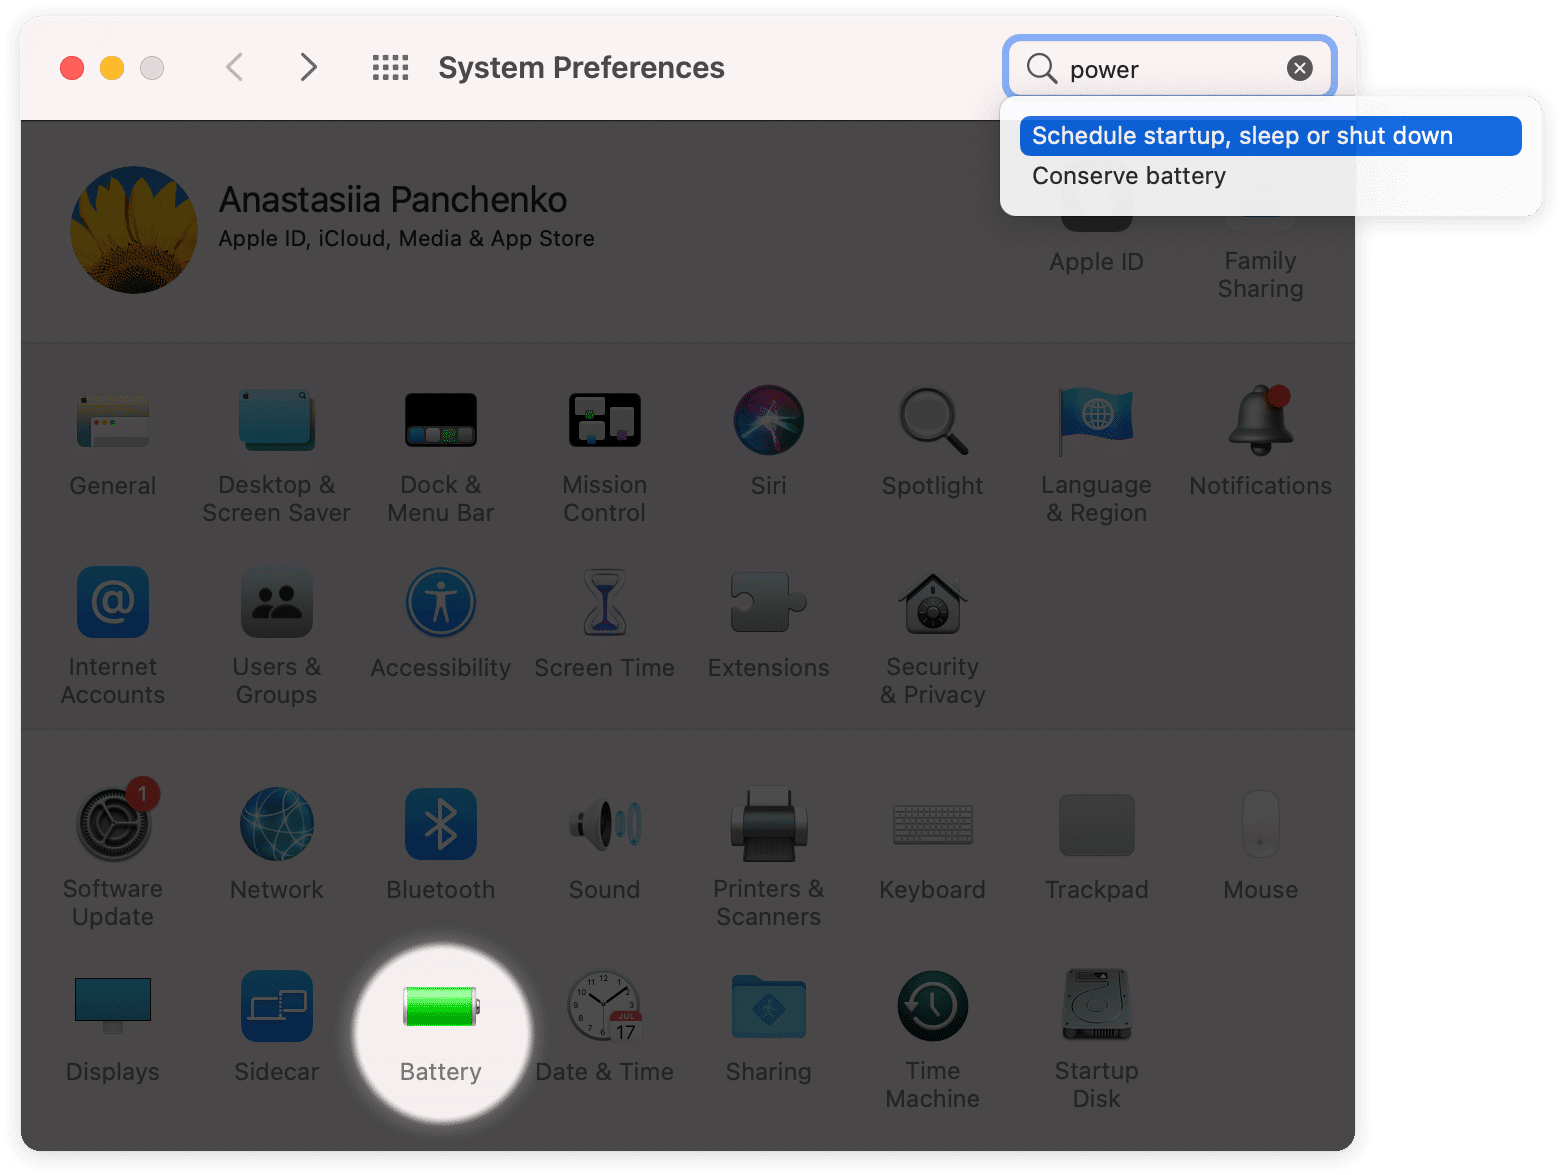 System preferences window showing how to find certain settings